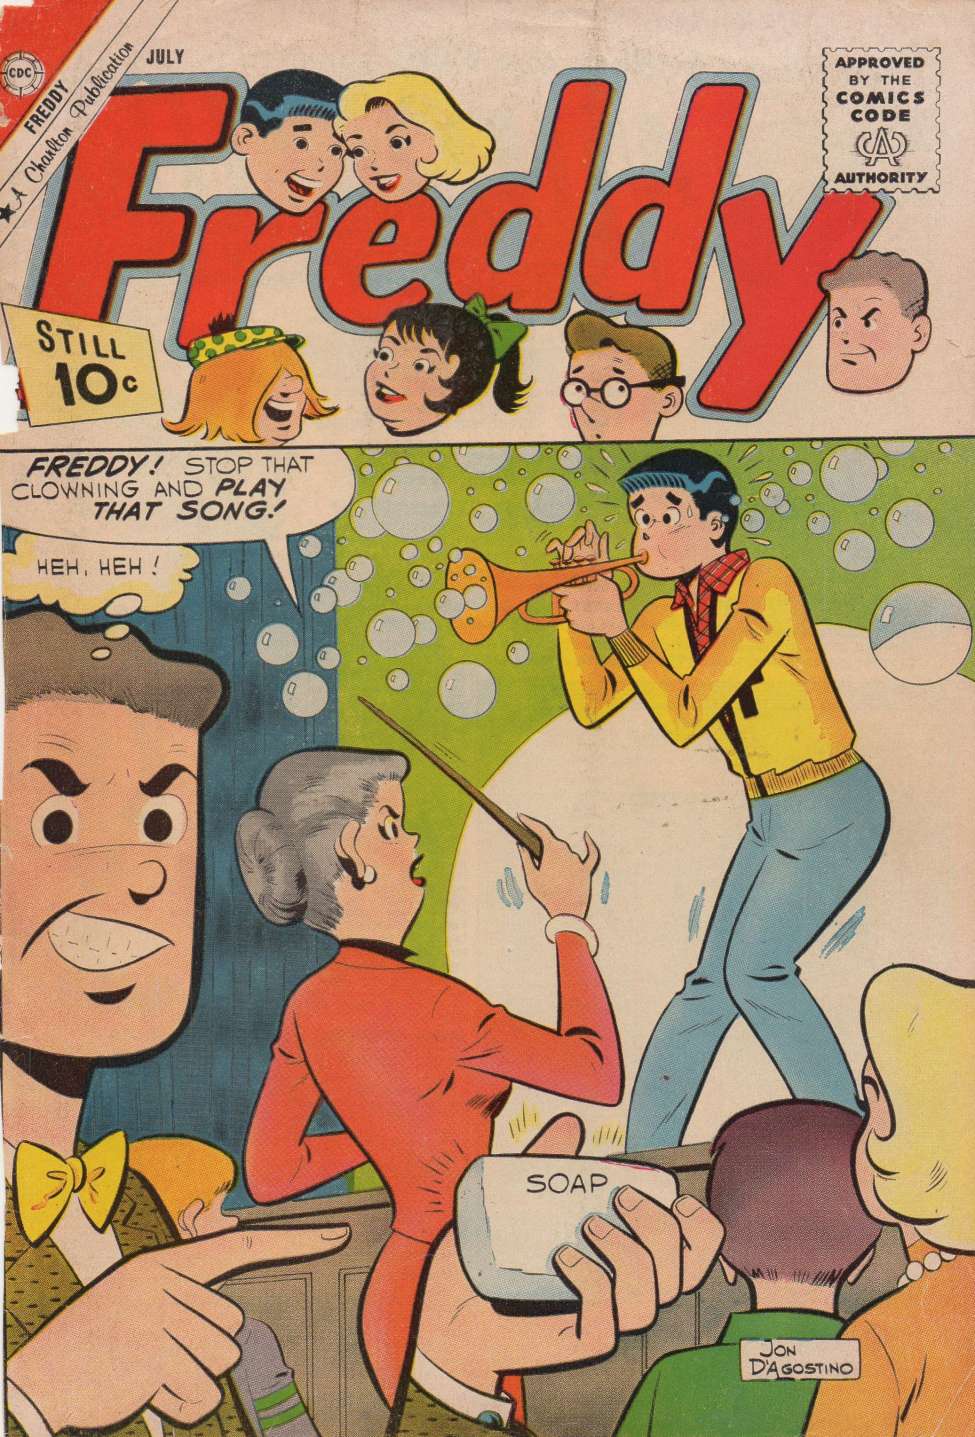 Book Cover For Freddy 29